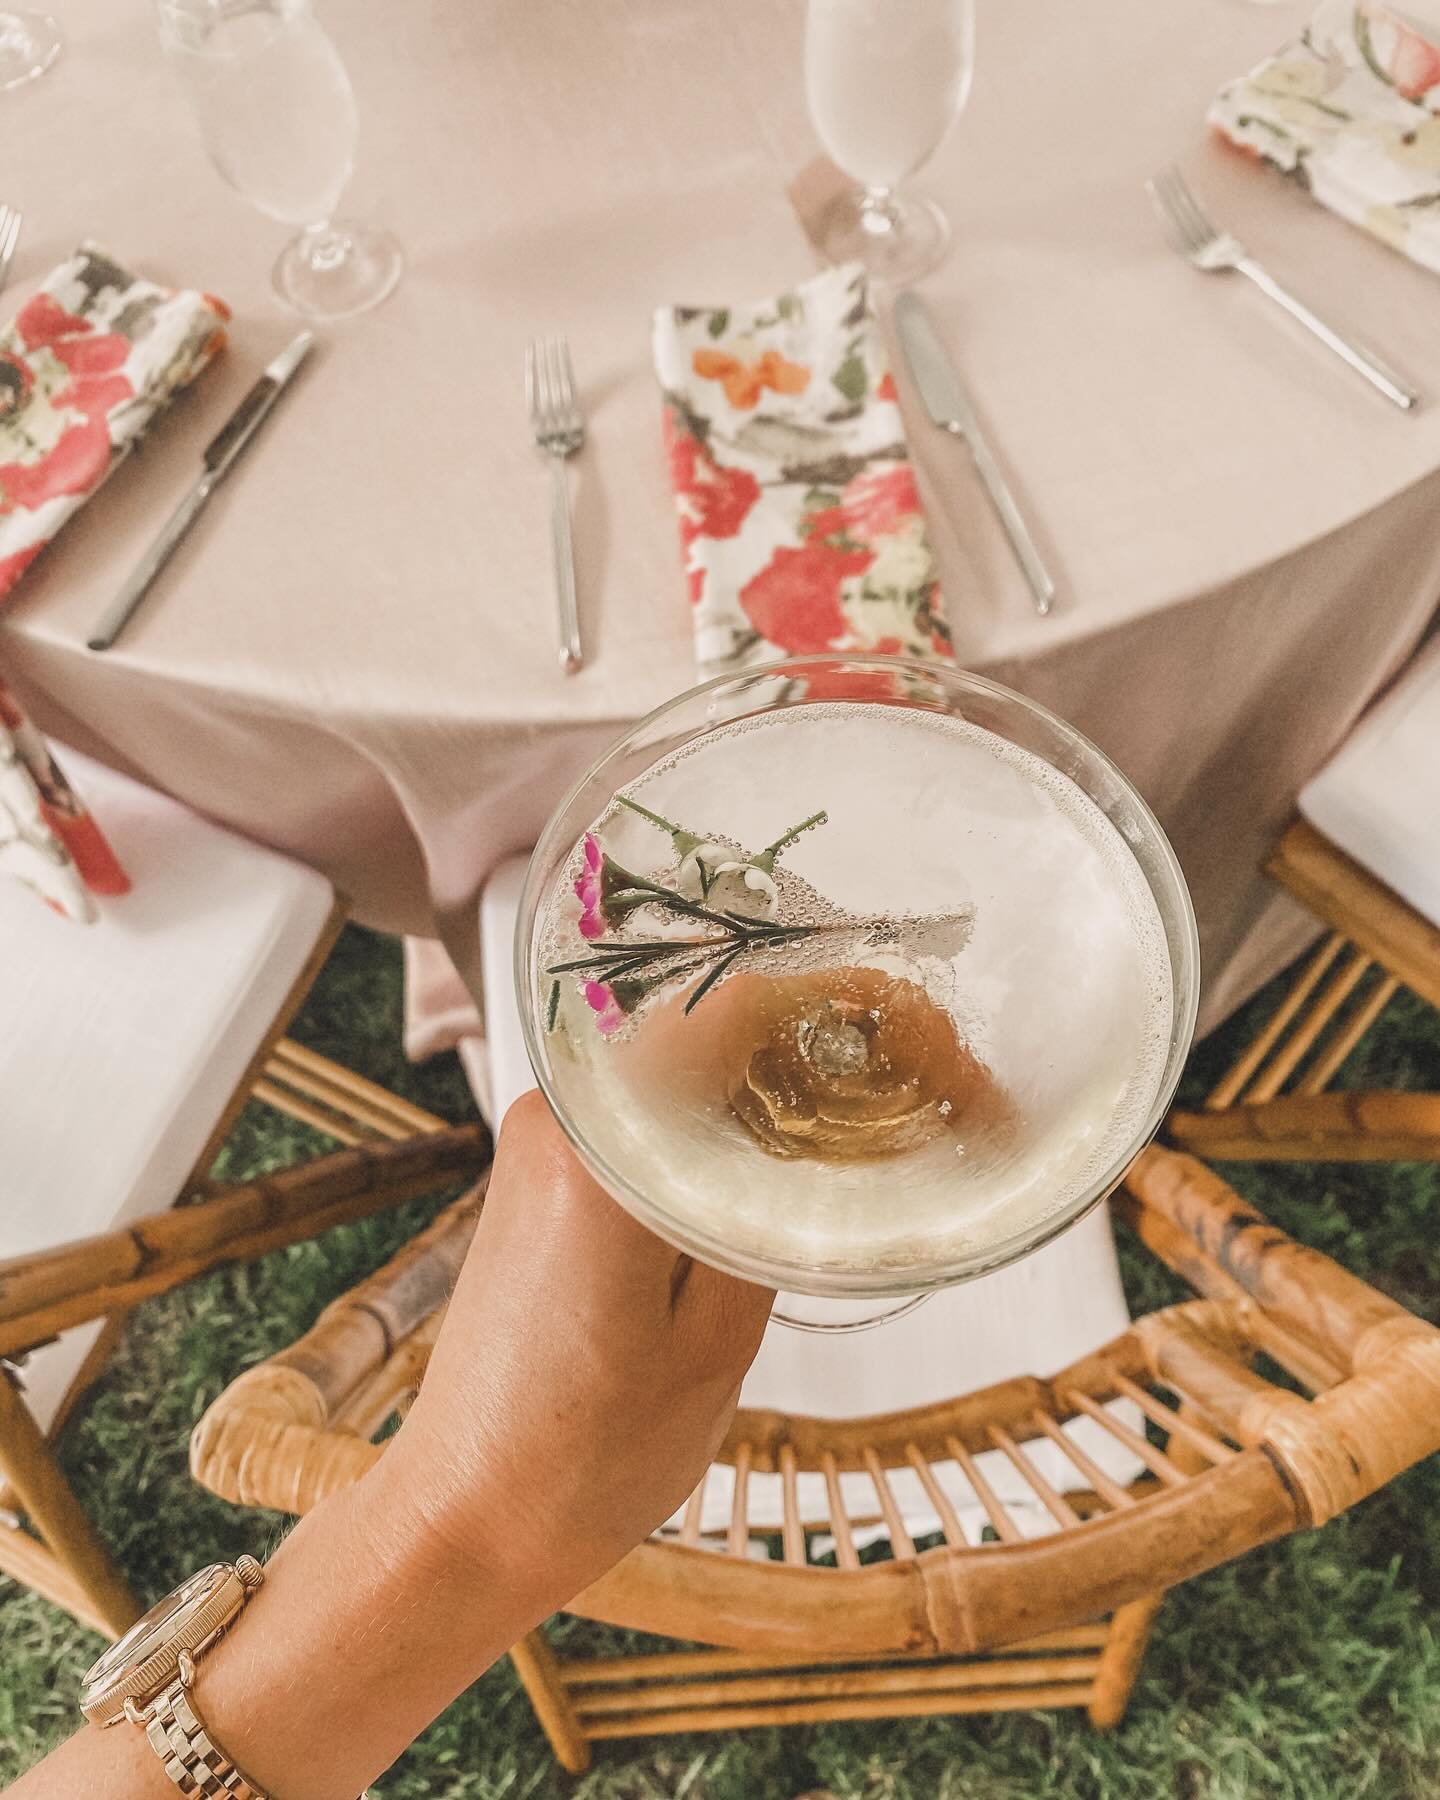 Cheers to the weekend! ✨

Signature drinks are one of our favorite ways to add a personal touch to your wedding!